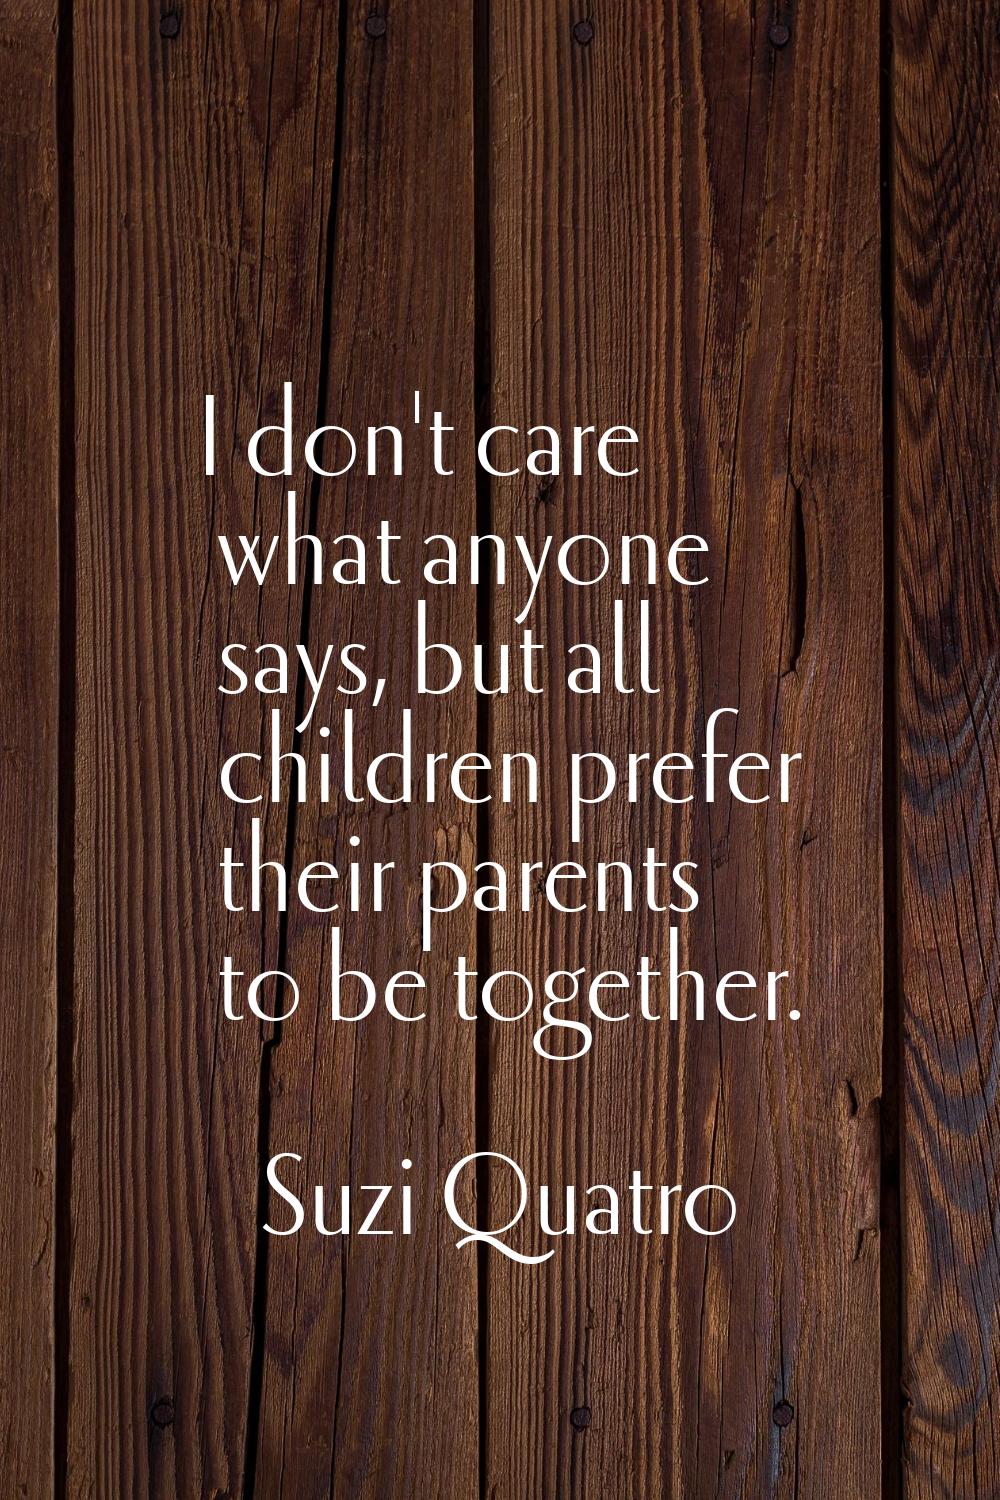 I don't care what anyone says, but all children prefer their parents to be together.